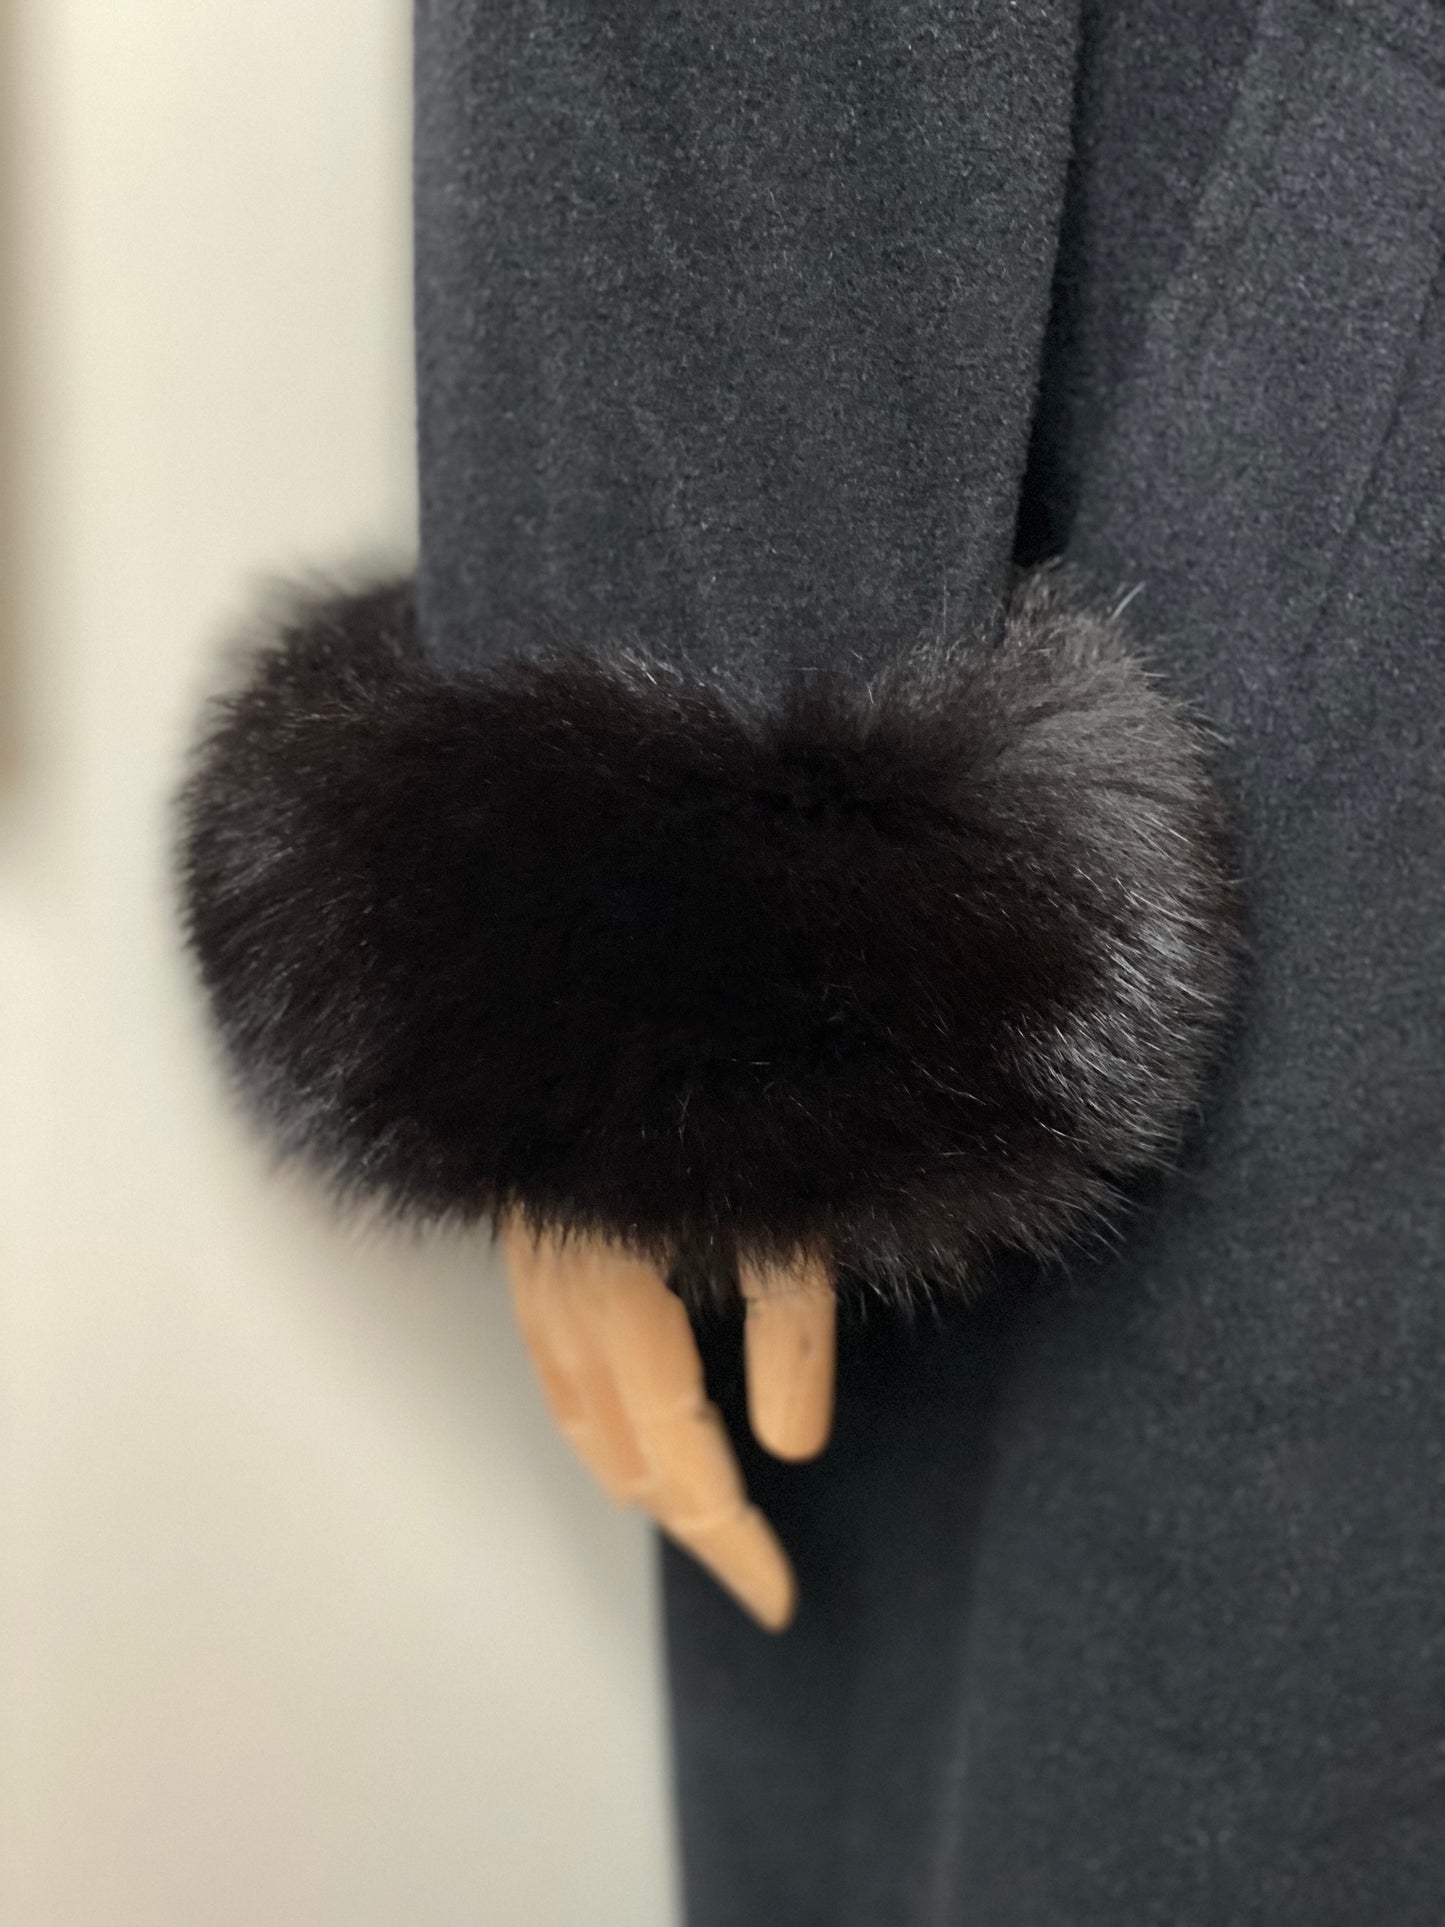 Vintage Wool and Mohair Black Coat With Fur Cuffs